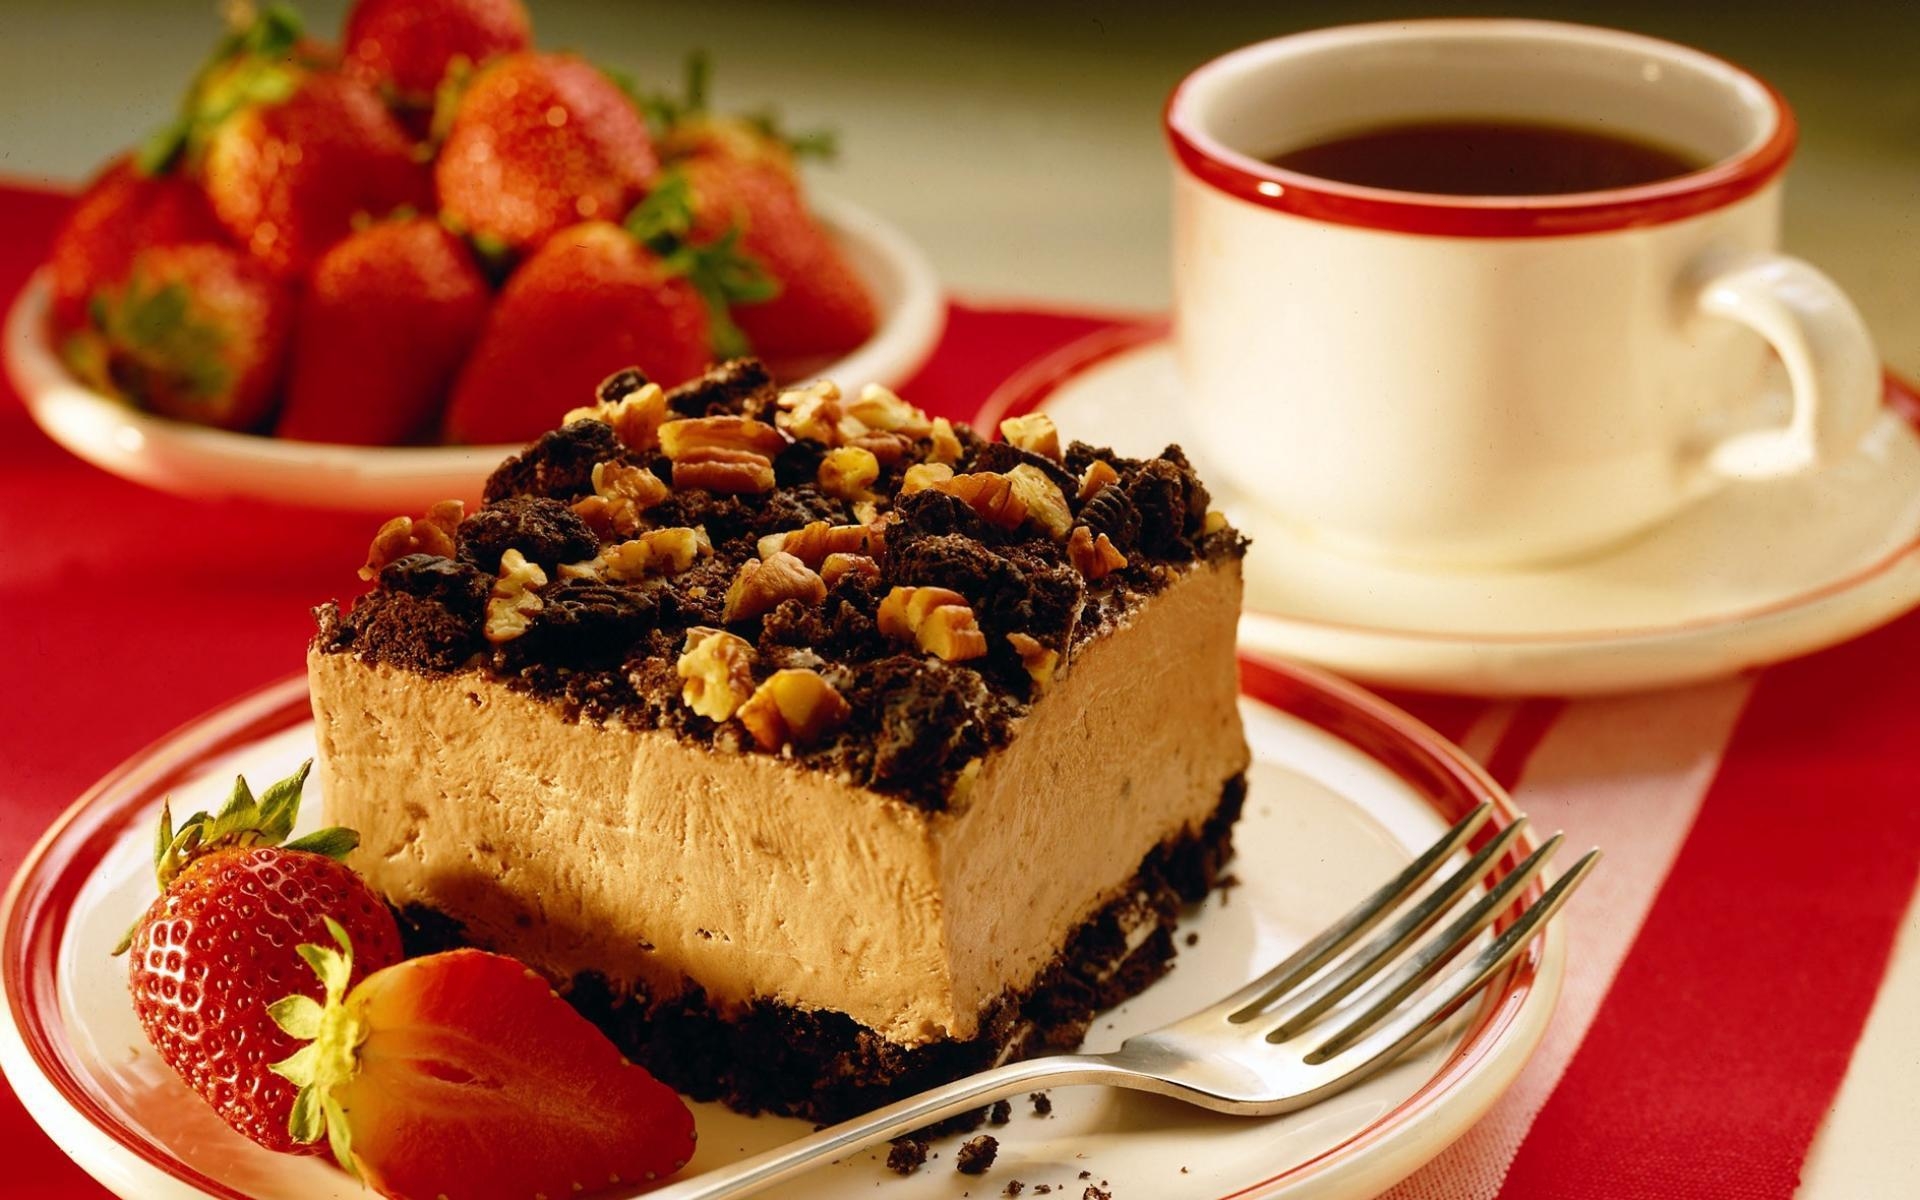 http://www.zastavki.com/pictures/1920x1200/2011/Food_Cakes_and_Sweet_Cake_with_tea_030985_.jpg